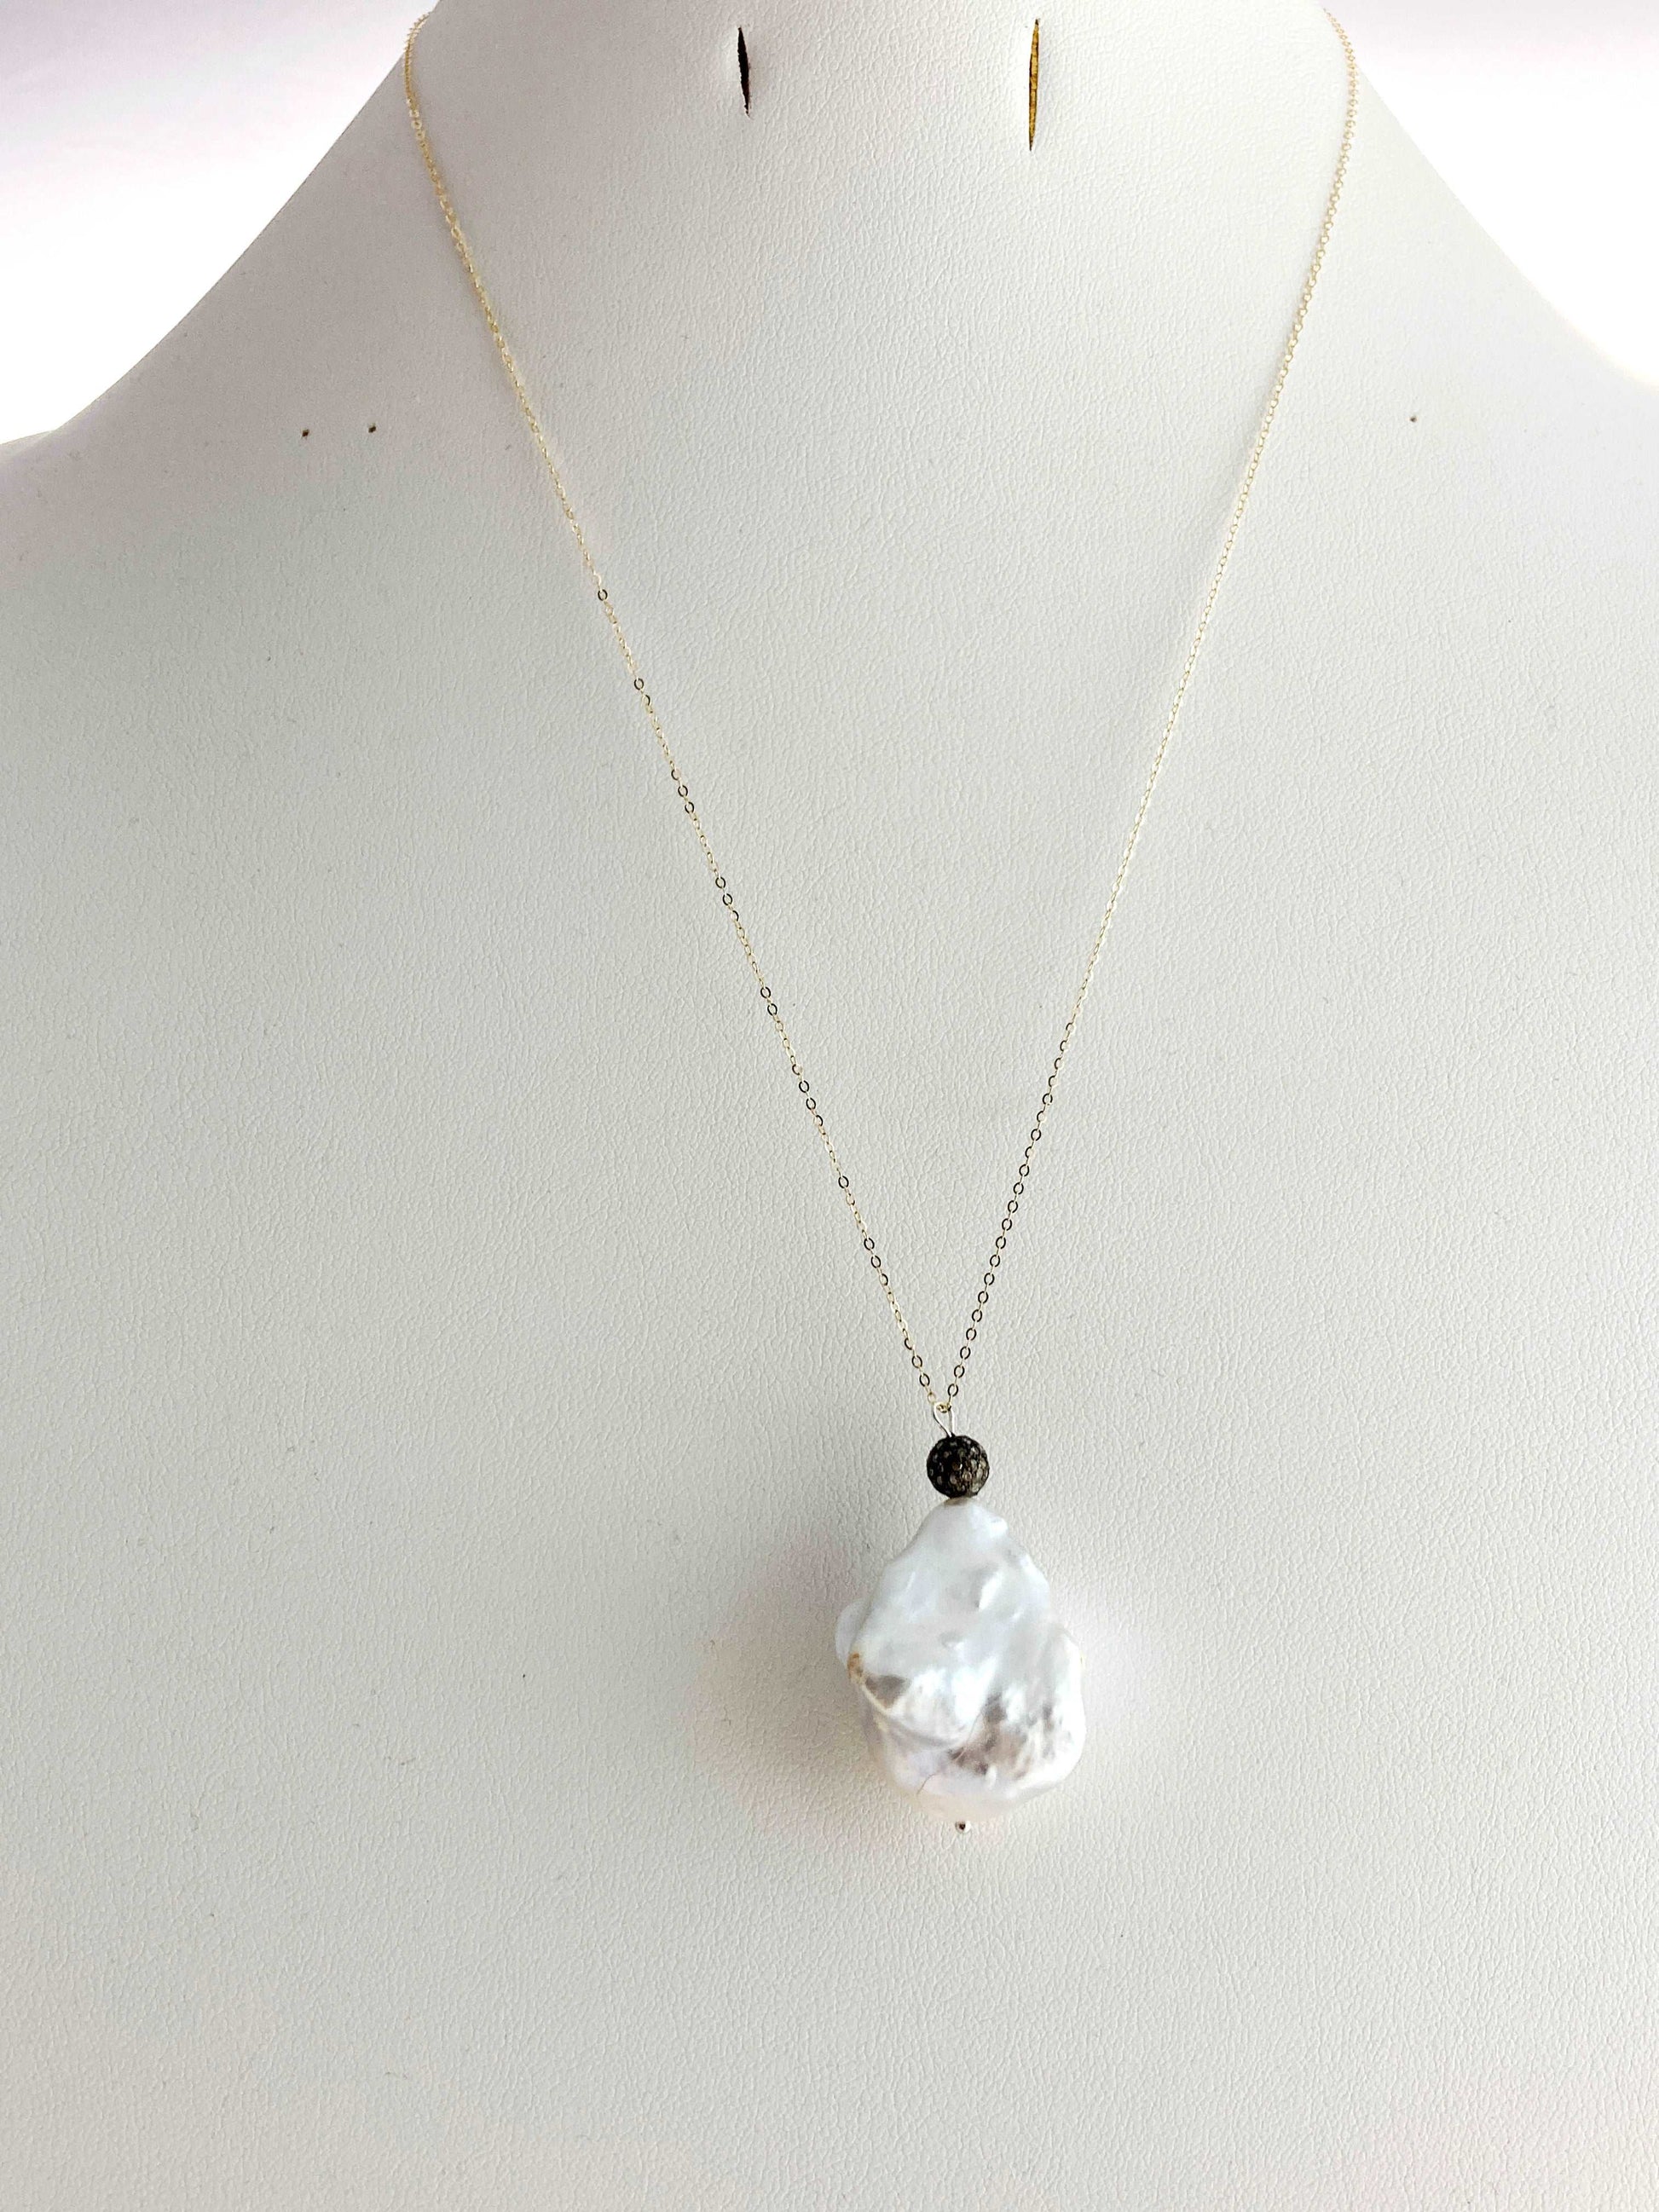 Unique one of a kind Baroque pearl necklaces - Providence silver gold jewelry usa